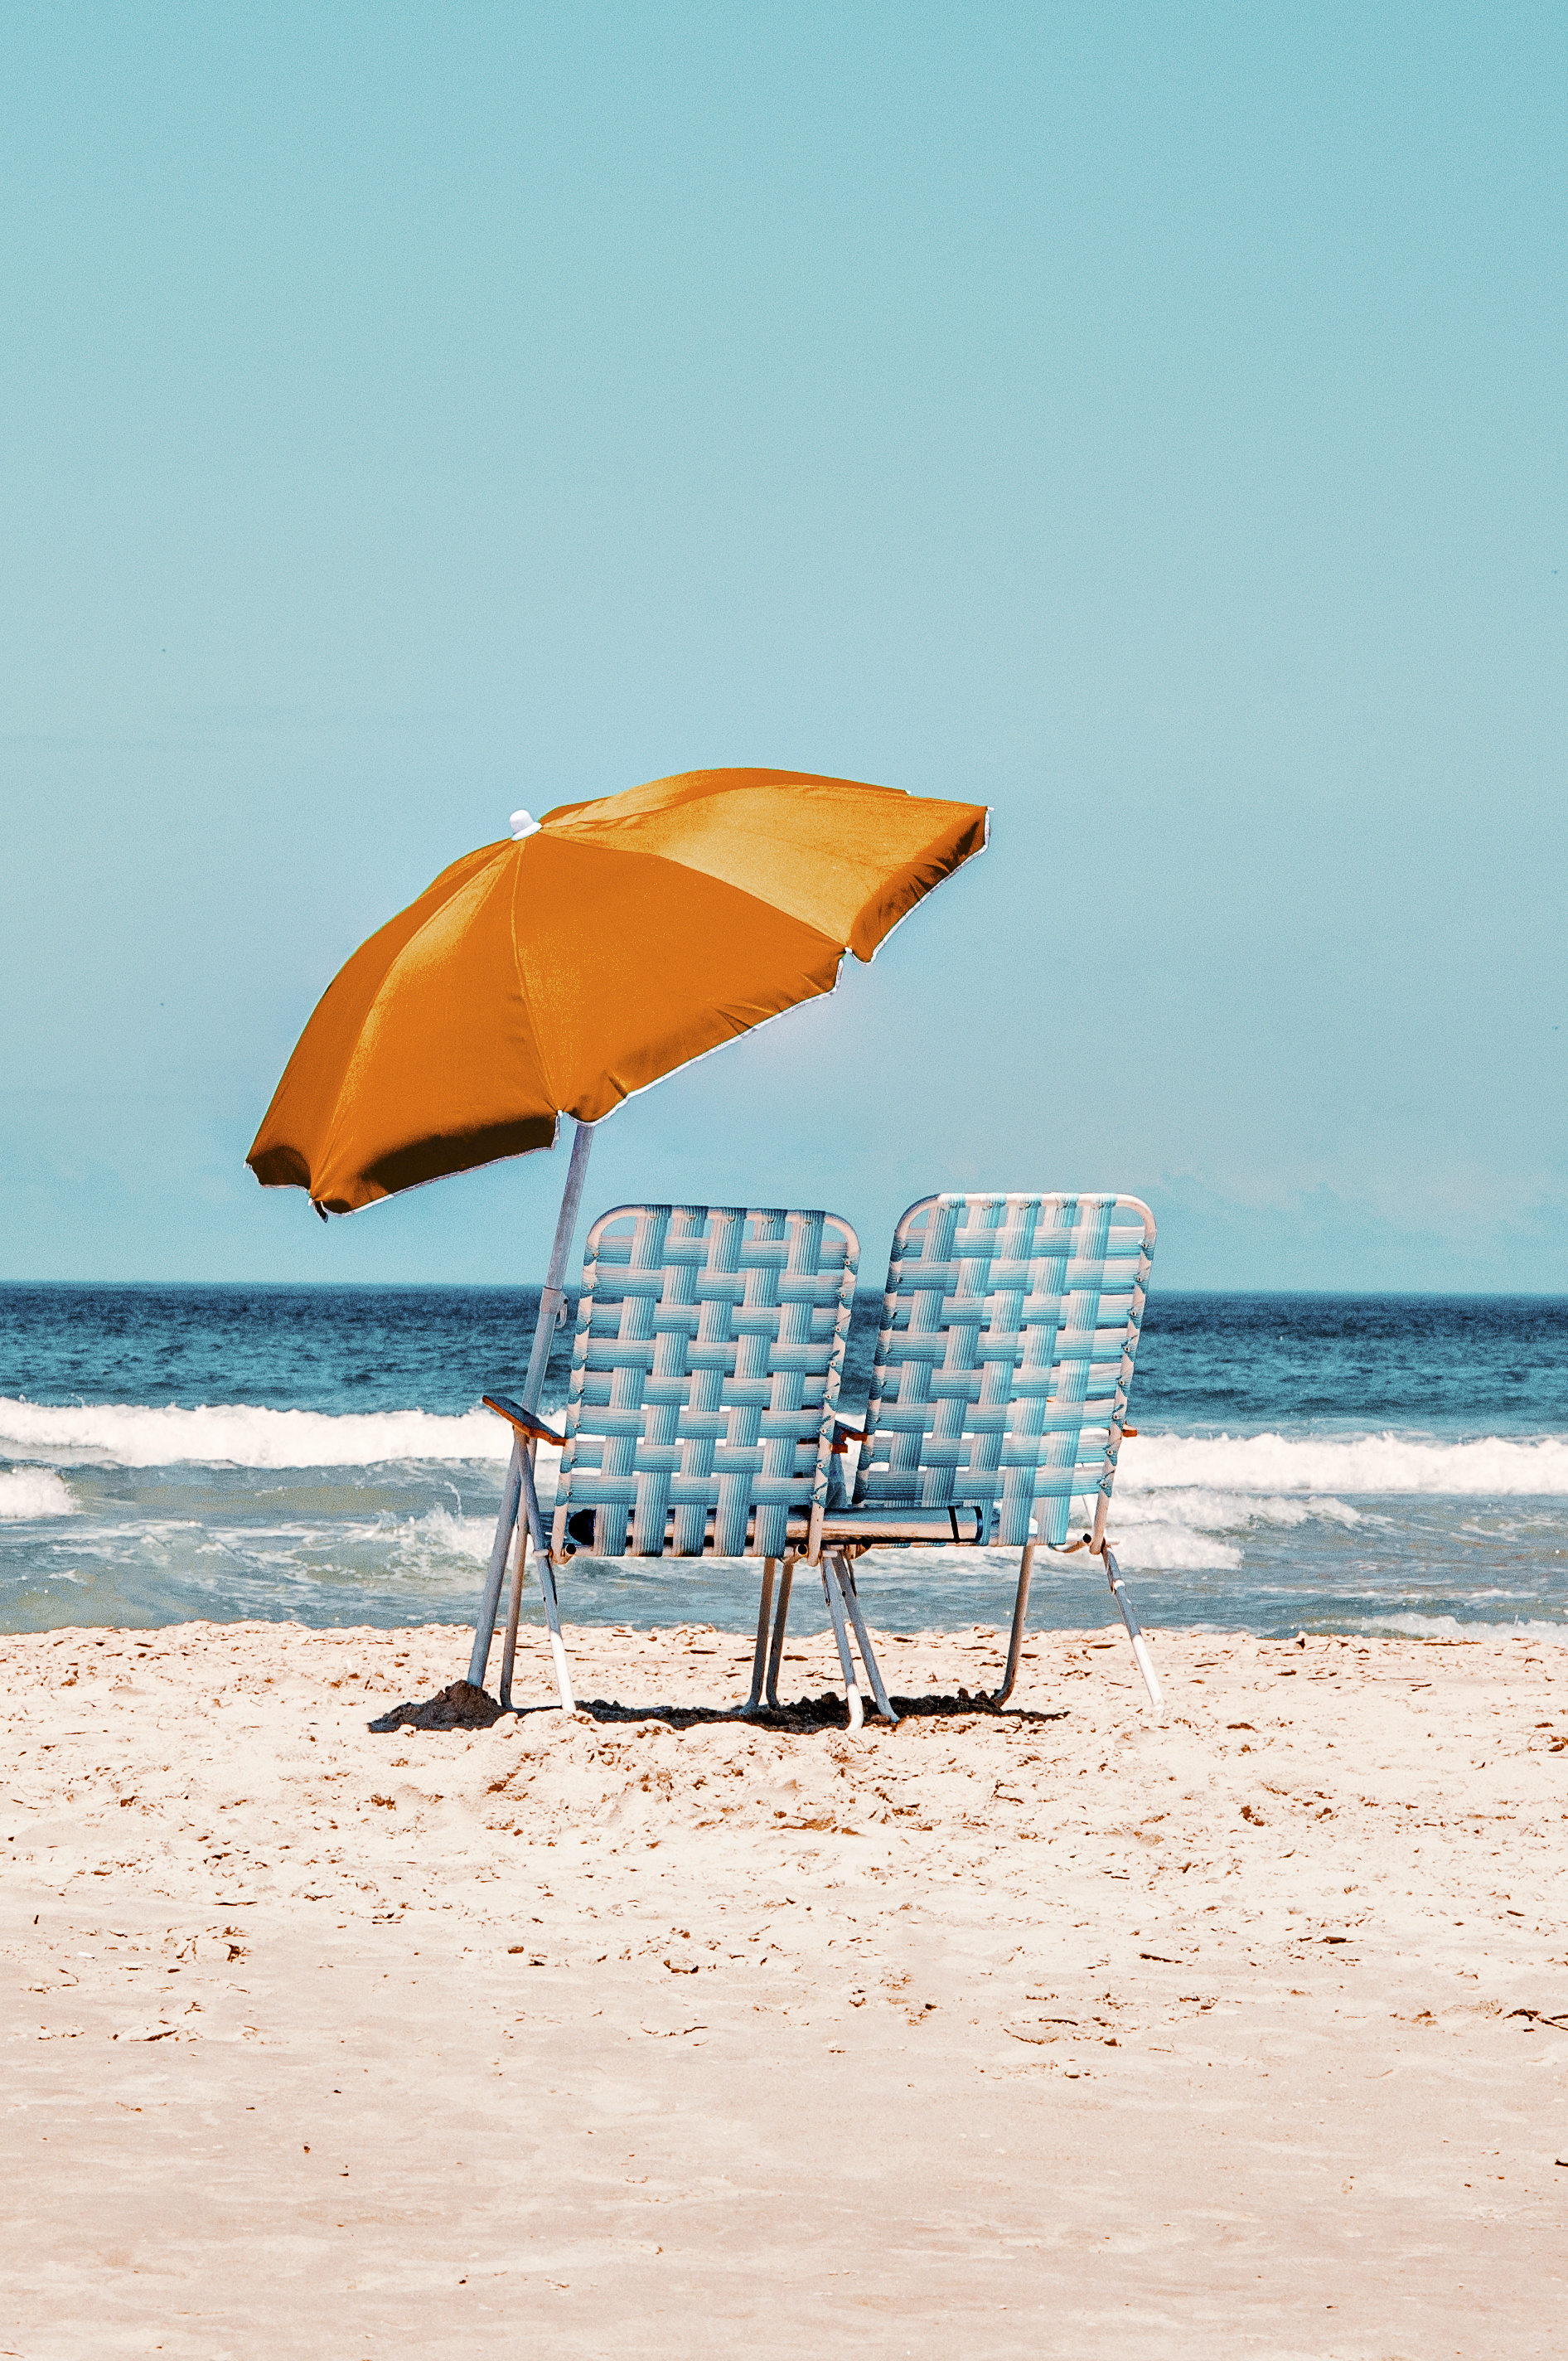 Beach Umbrella: Parasol, that is used as a protection from the sun's rays. 1900x2850 HD Wallpaper.